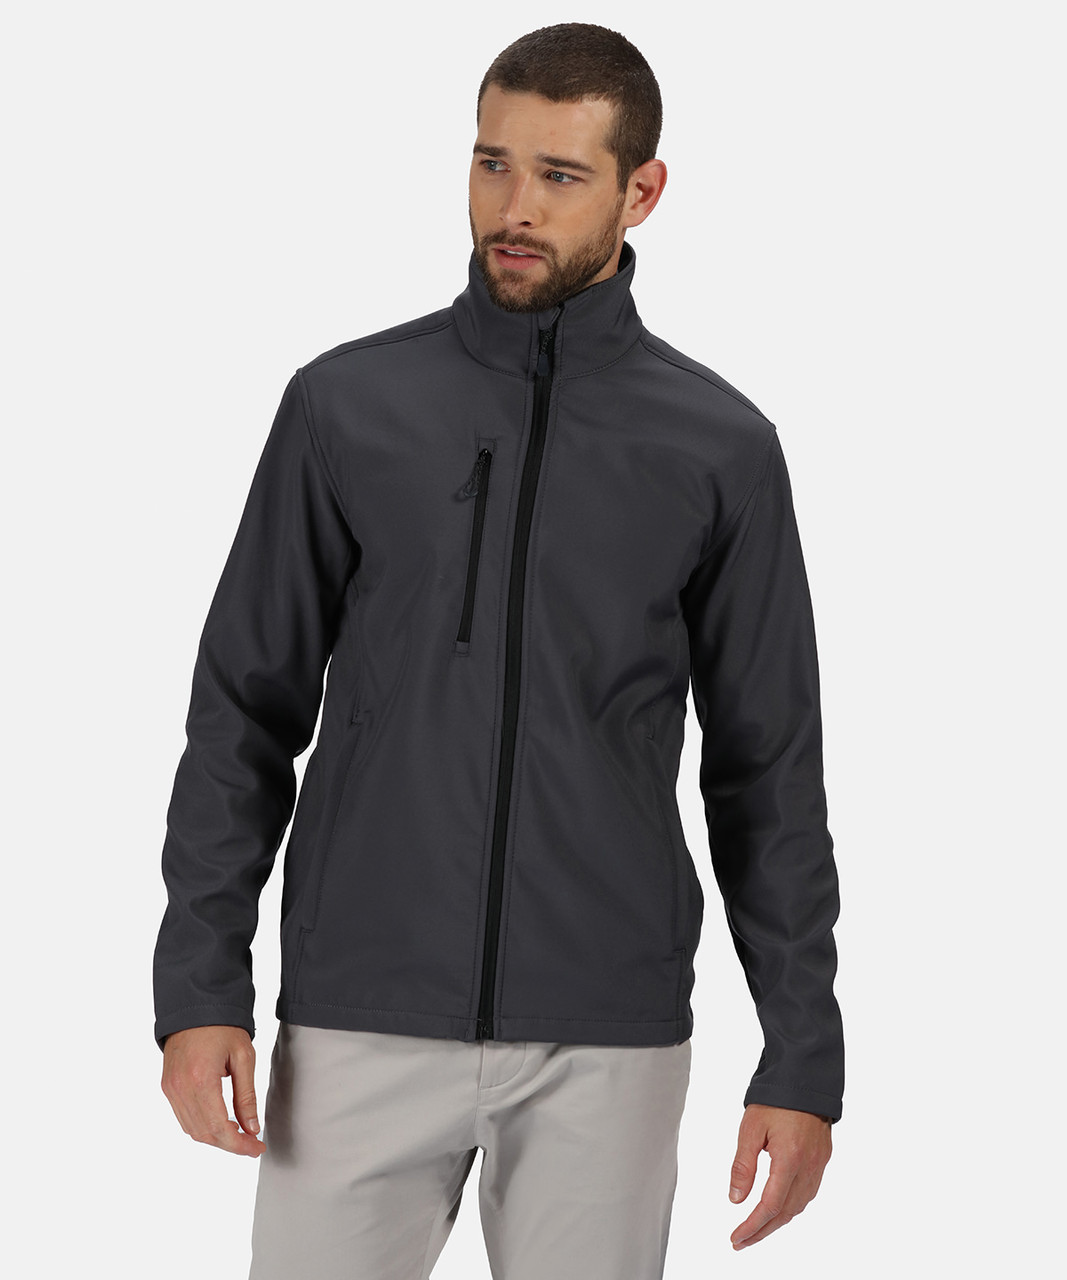 RG350 Regatta Recycled Softshell Jacket | Kit-You-Out